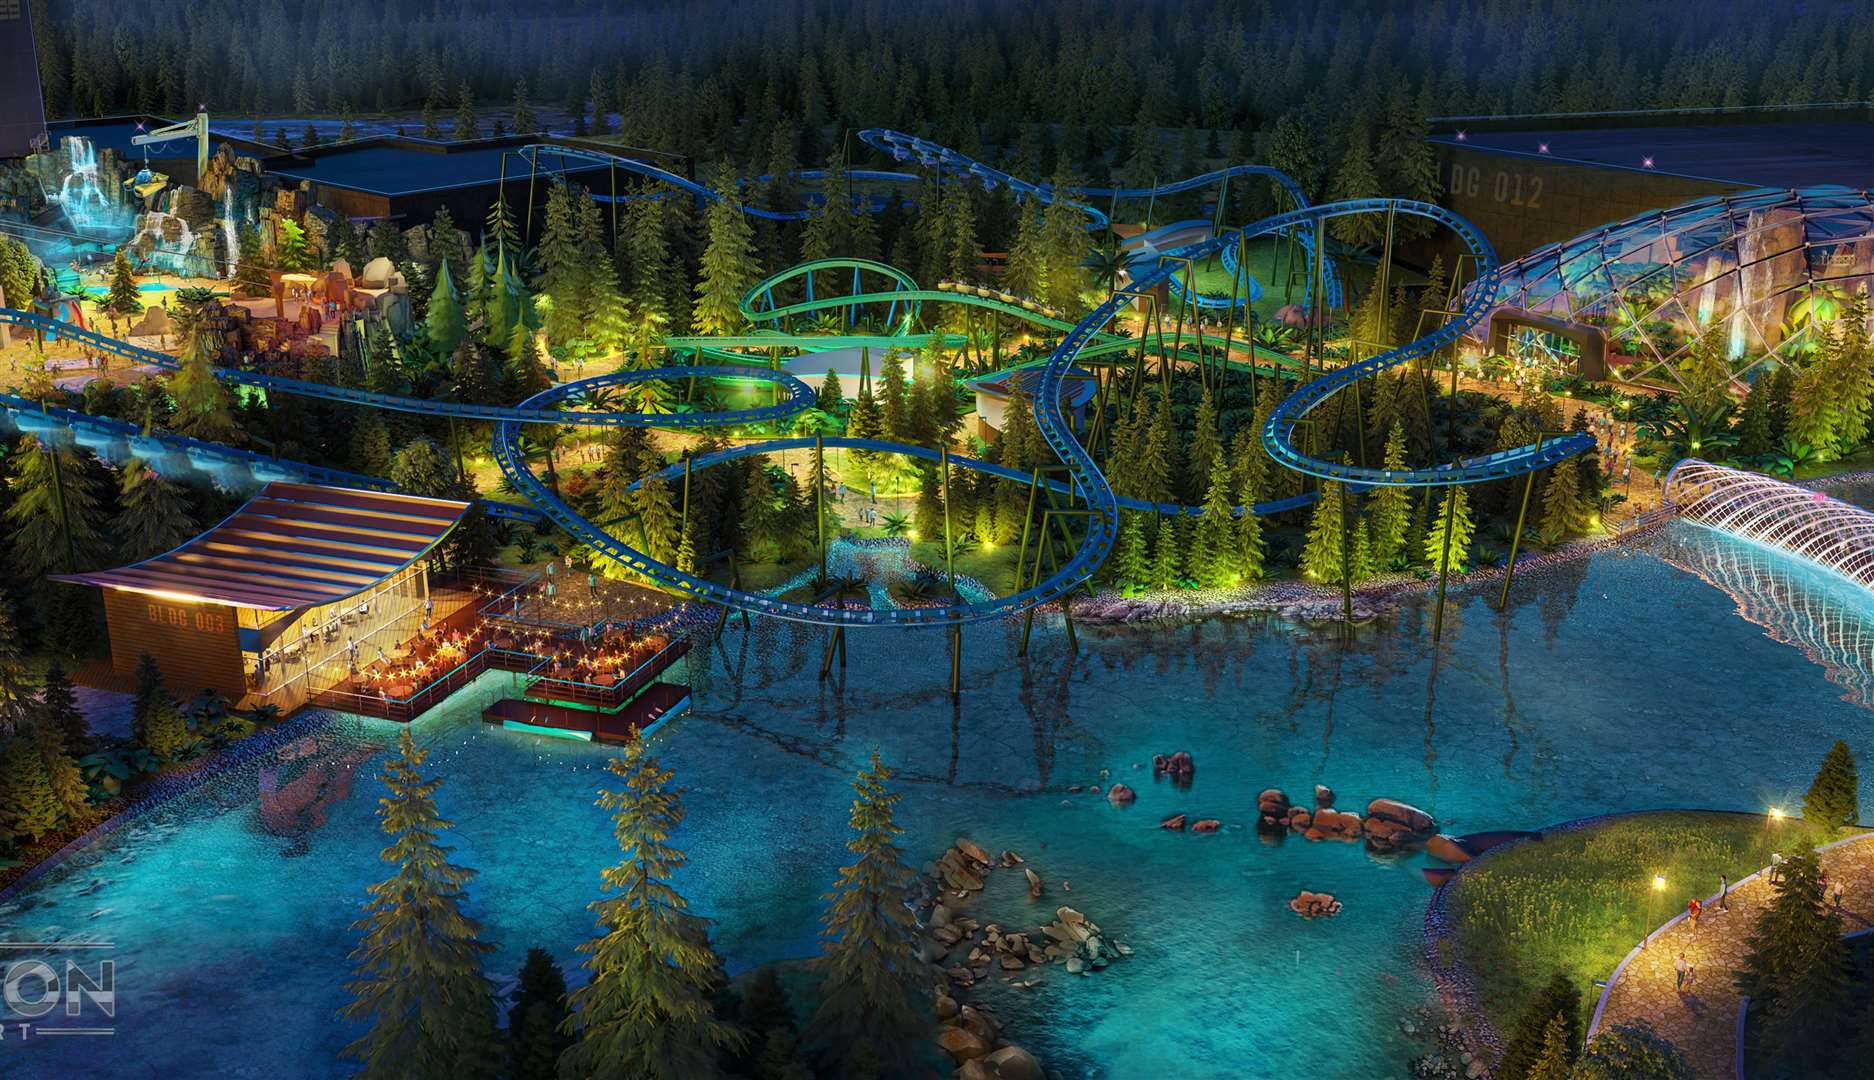 The London Resort has announced a new zone "Base Camp" dedicated to dinosaurs and prehistoric discovery